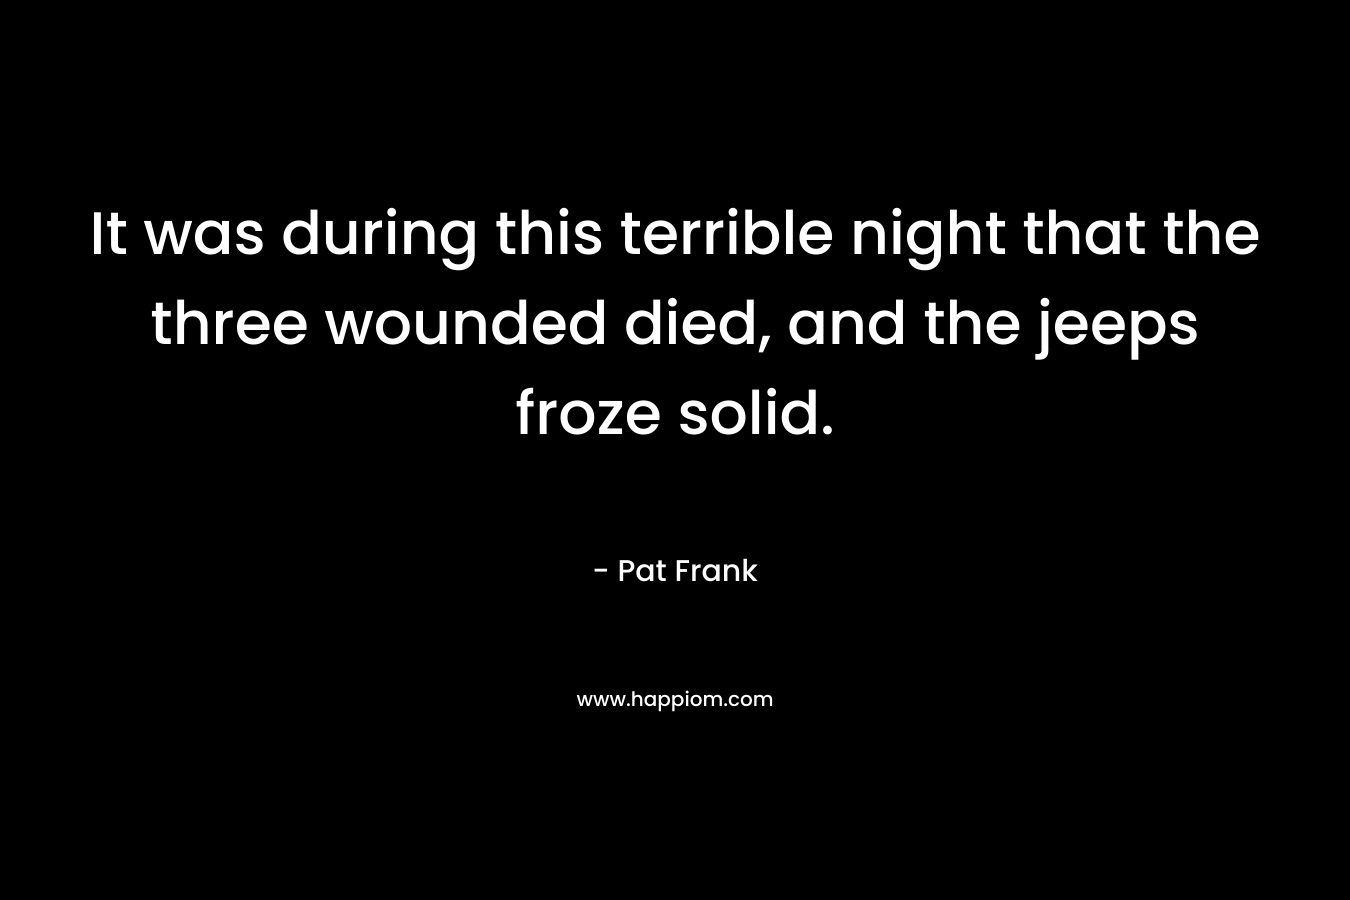 It was during this terrible night that the three wounded died, and the jeeps froze solid. – Pat Frank